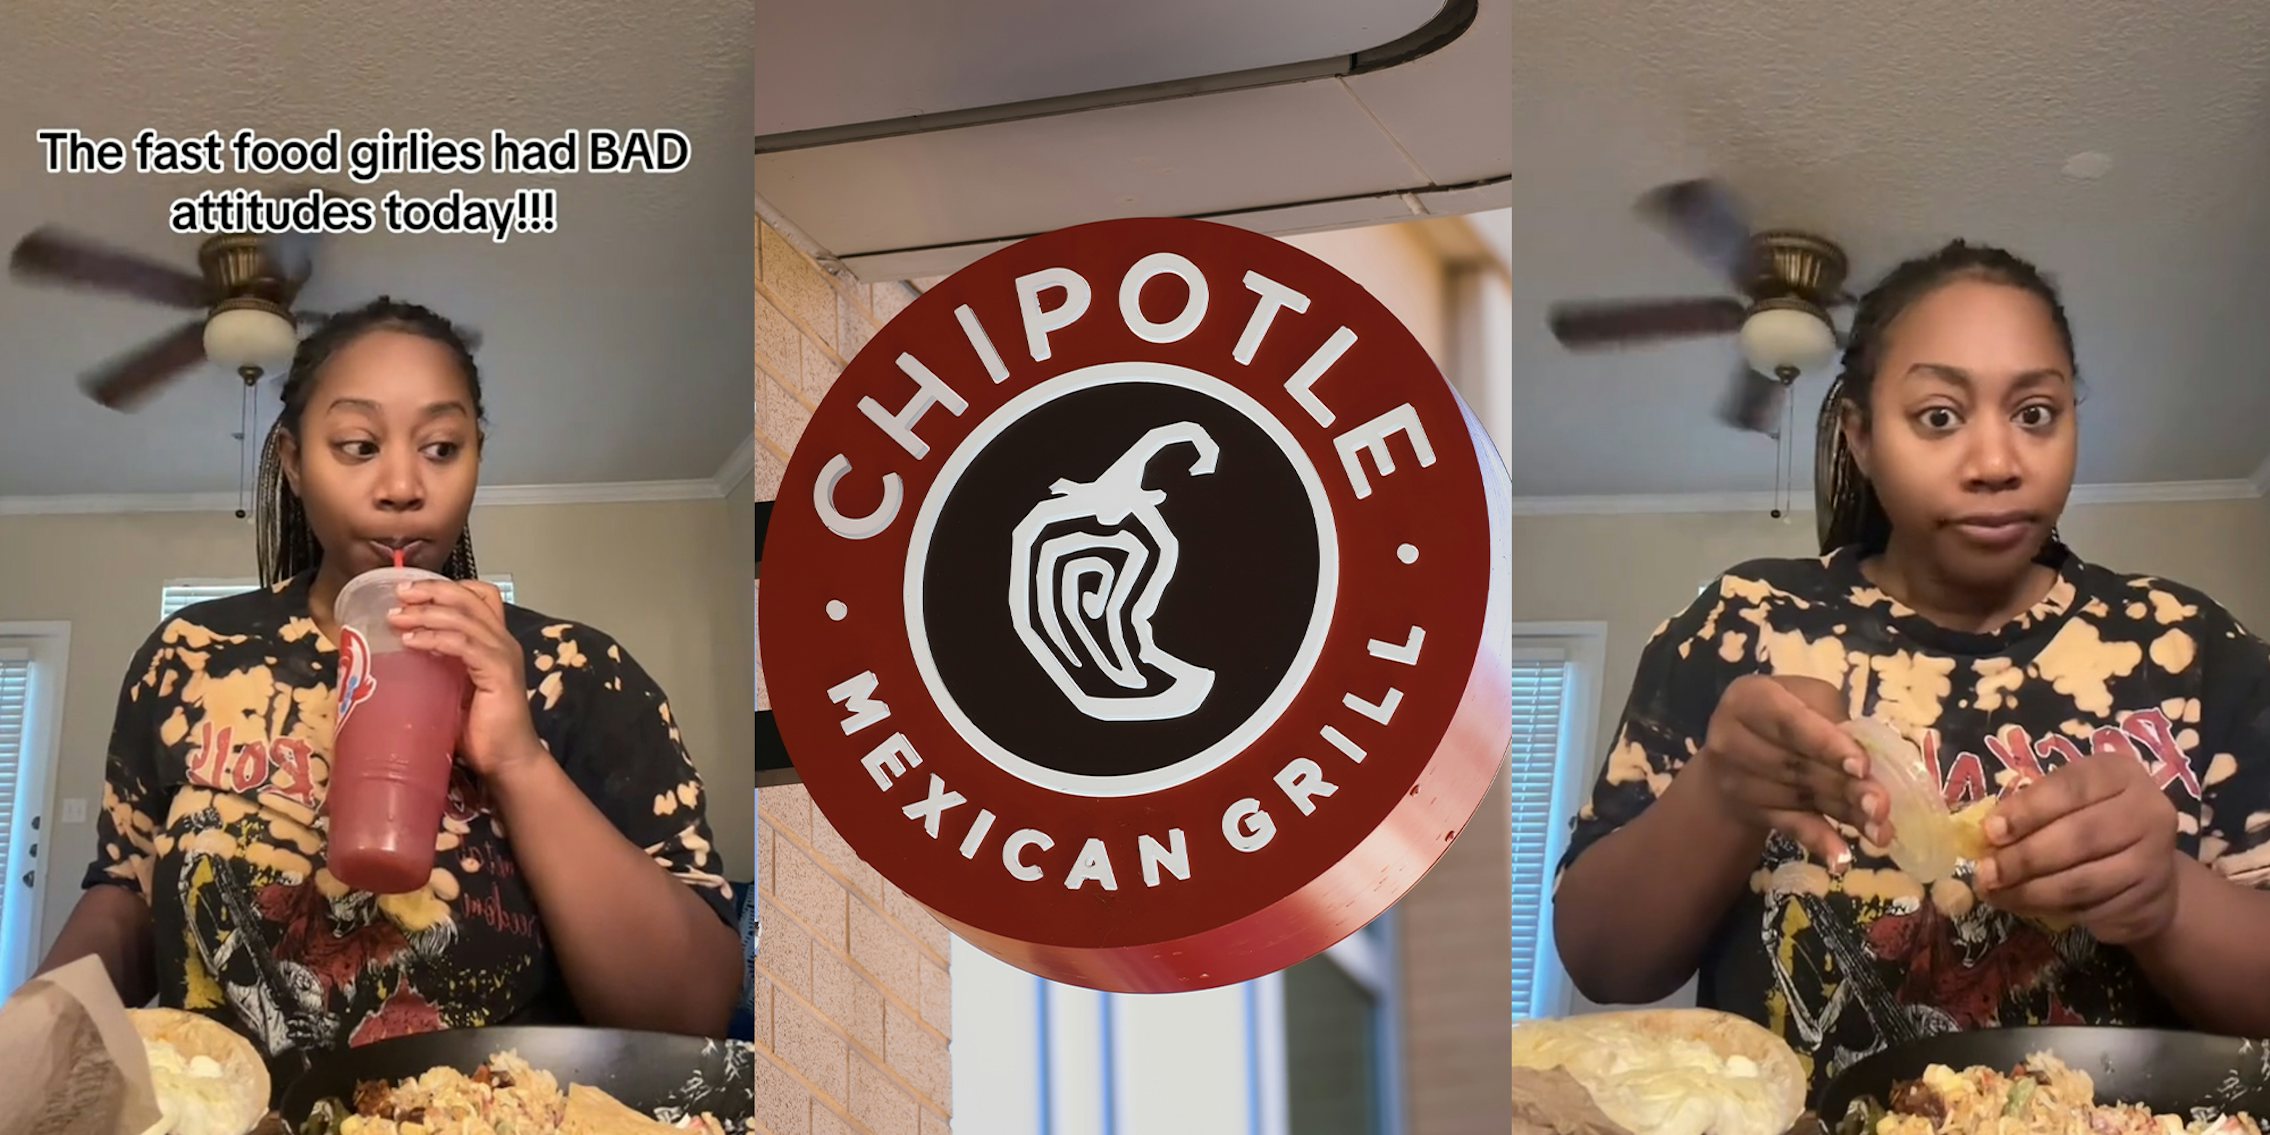 Chipotle customer asks for 2 viniagrette. The worker said 'that's not a priority'